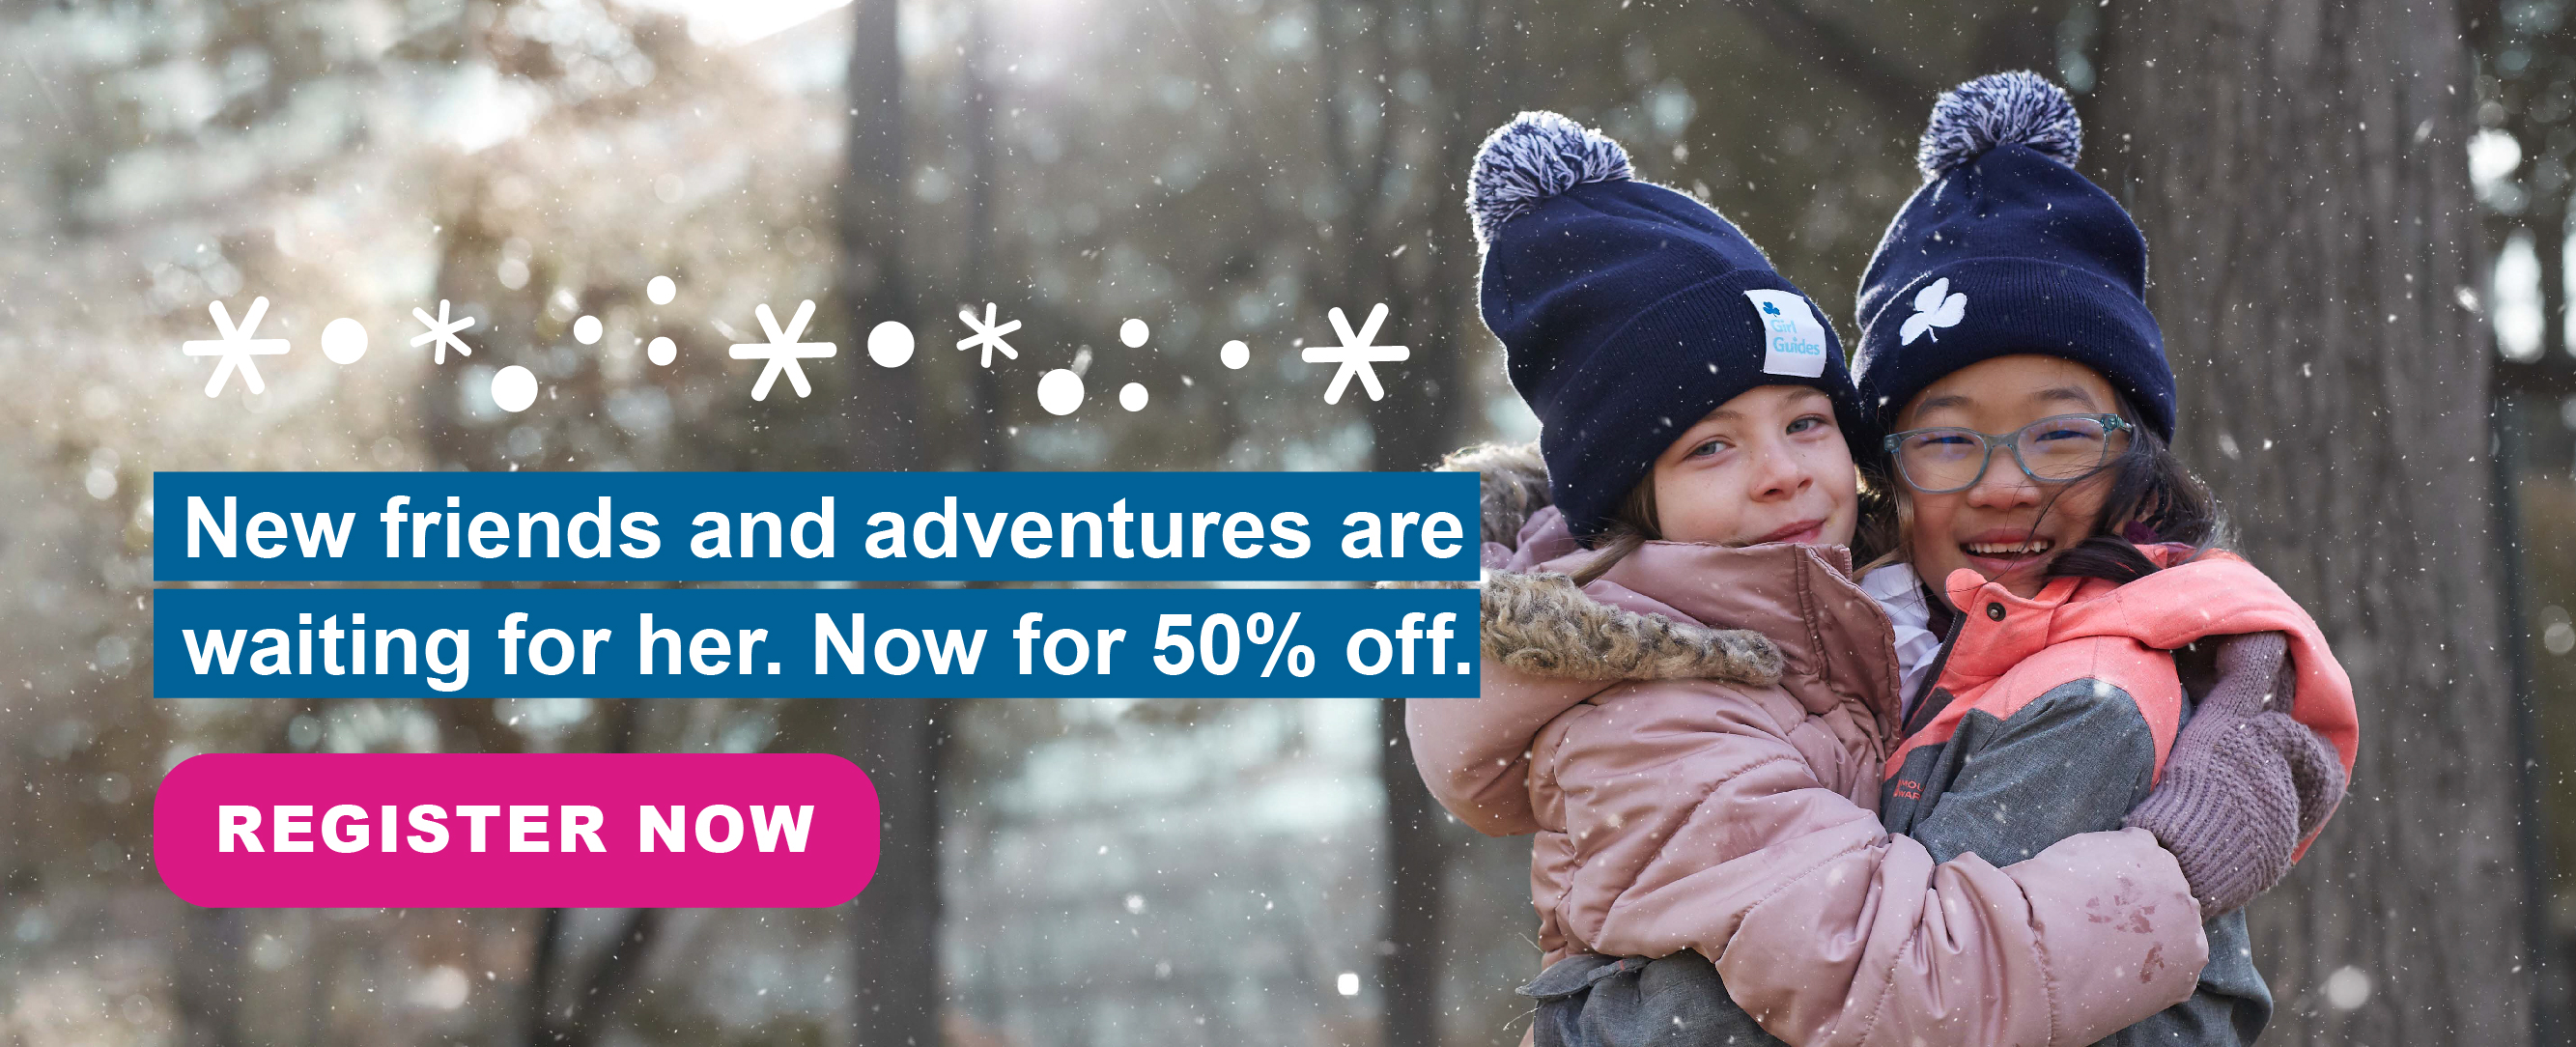  New friends and adventures are waiting for her. Now 50% off